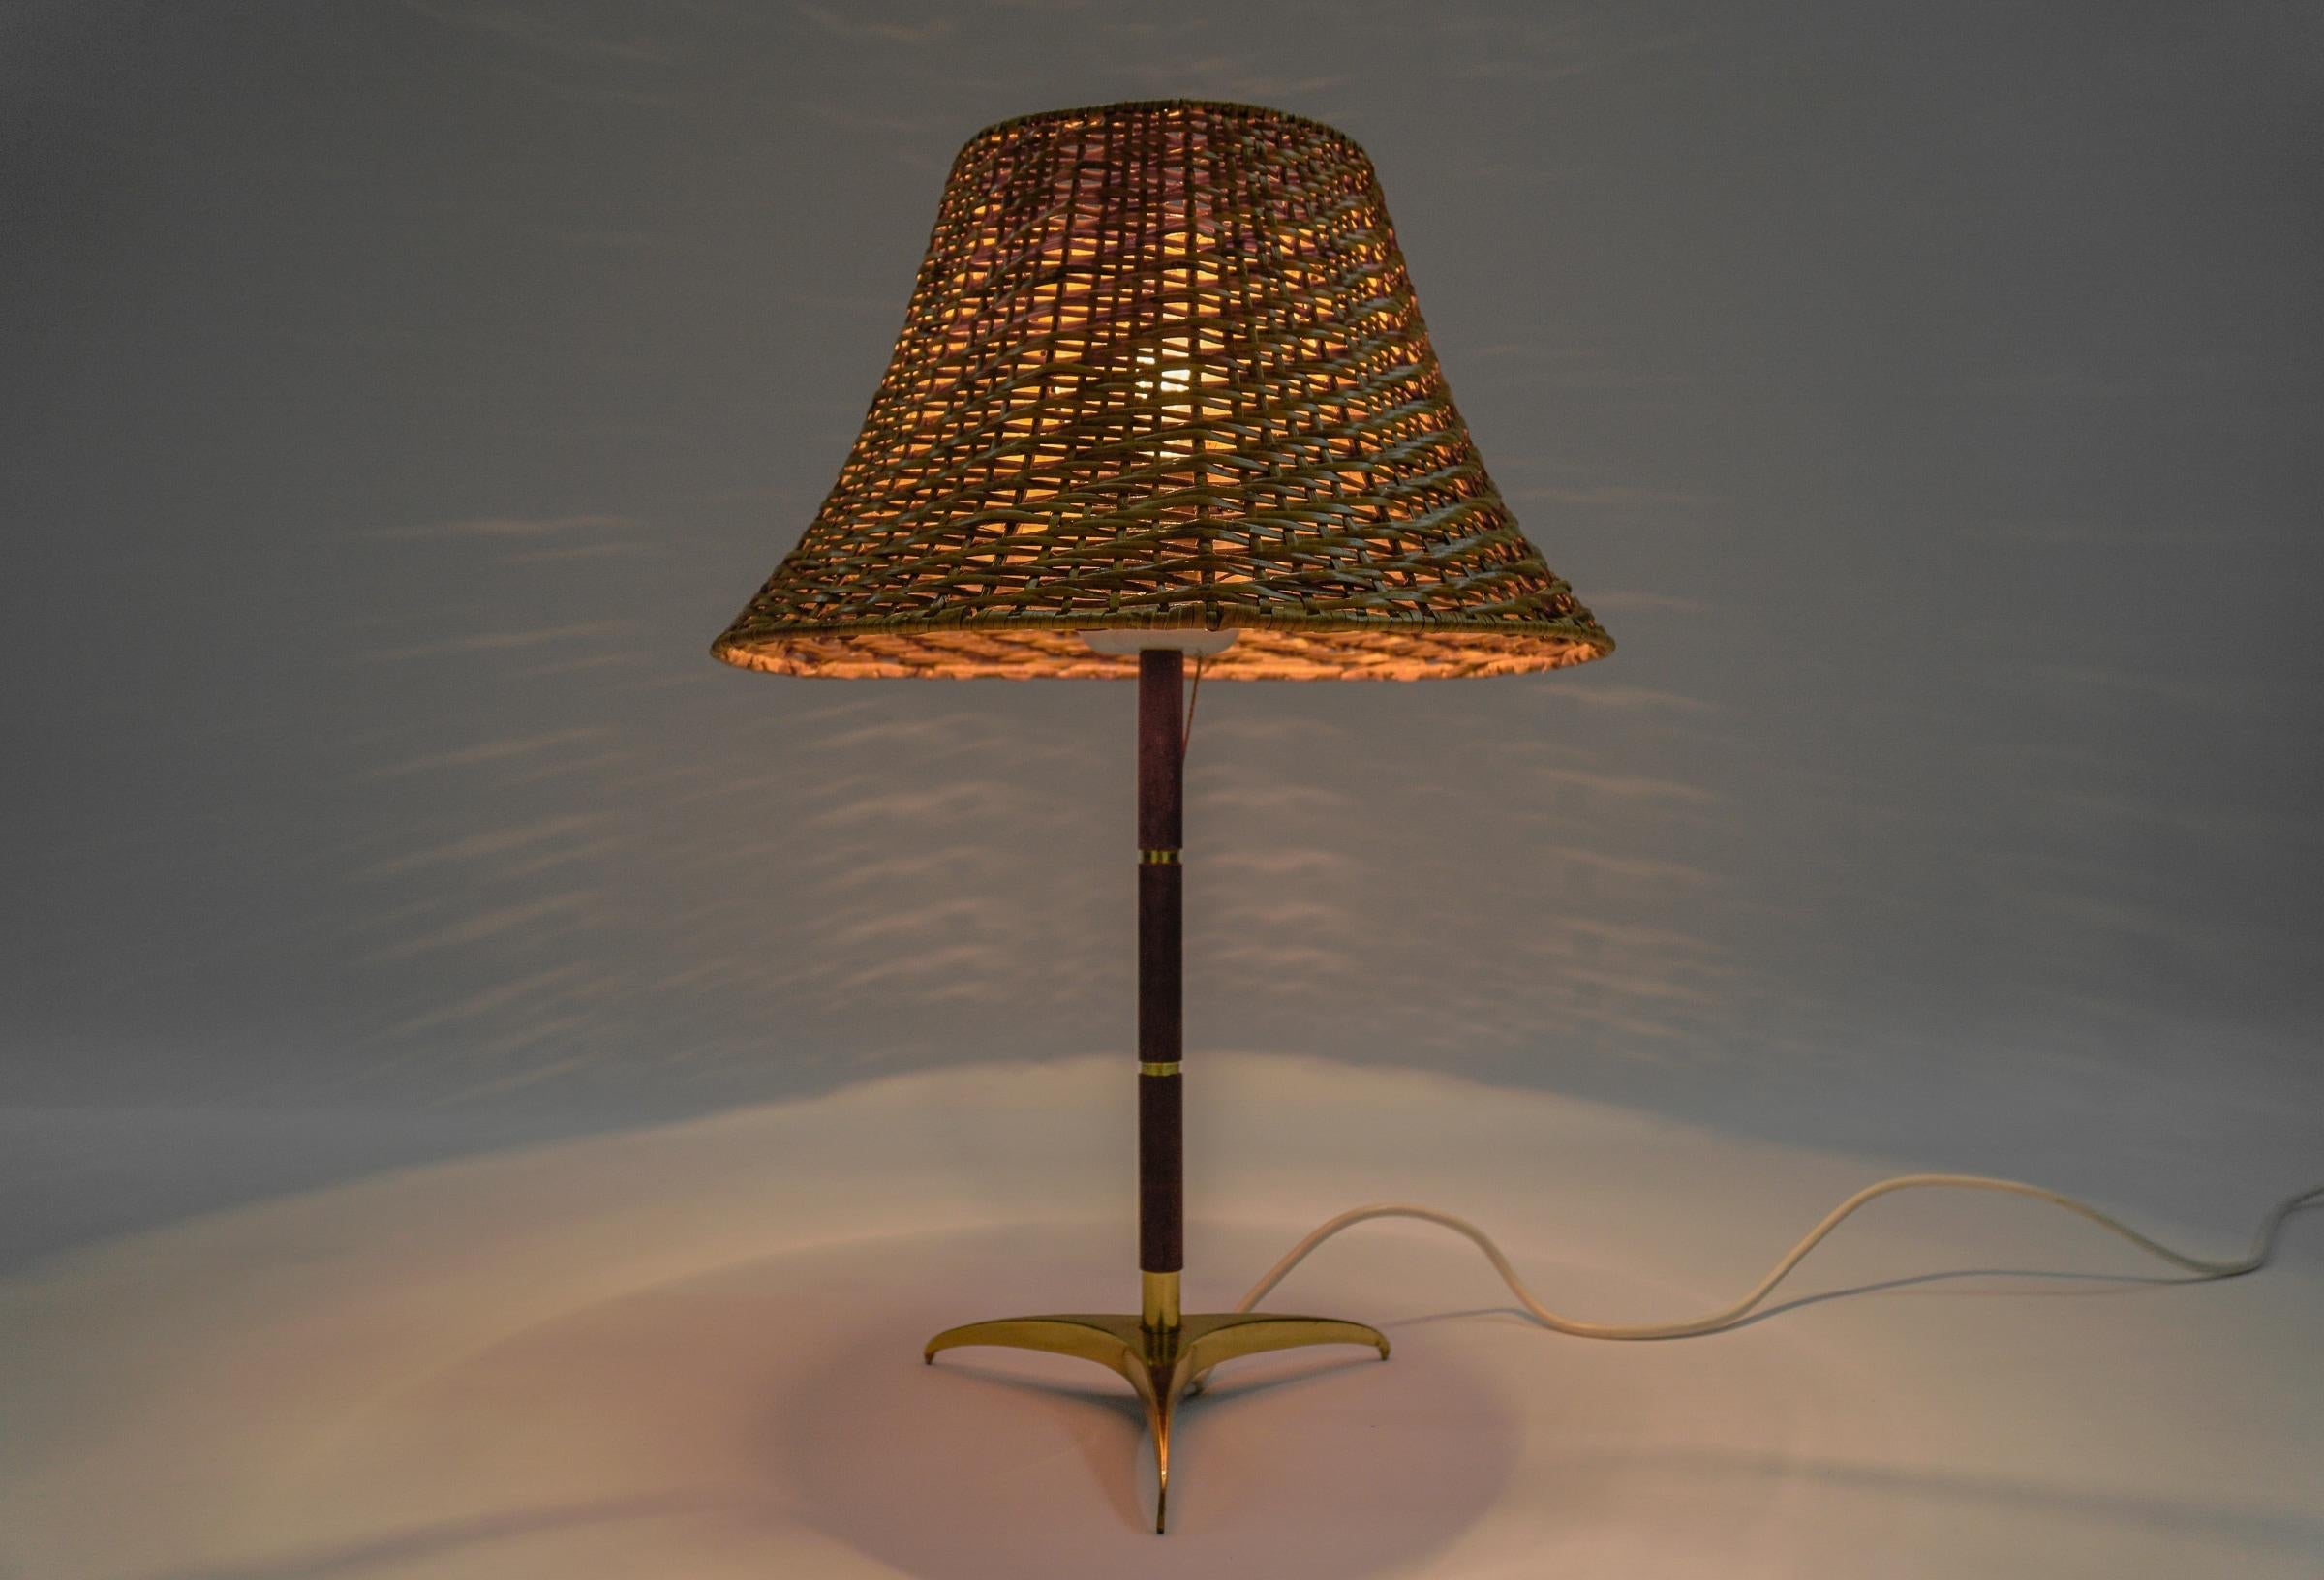 Lovely Mid-Century Modern Table Lamp in Brass, Wicker and Teak, 1950s, Austria In Good Condition For Sale In Nürnberg, Bayern